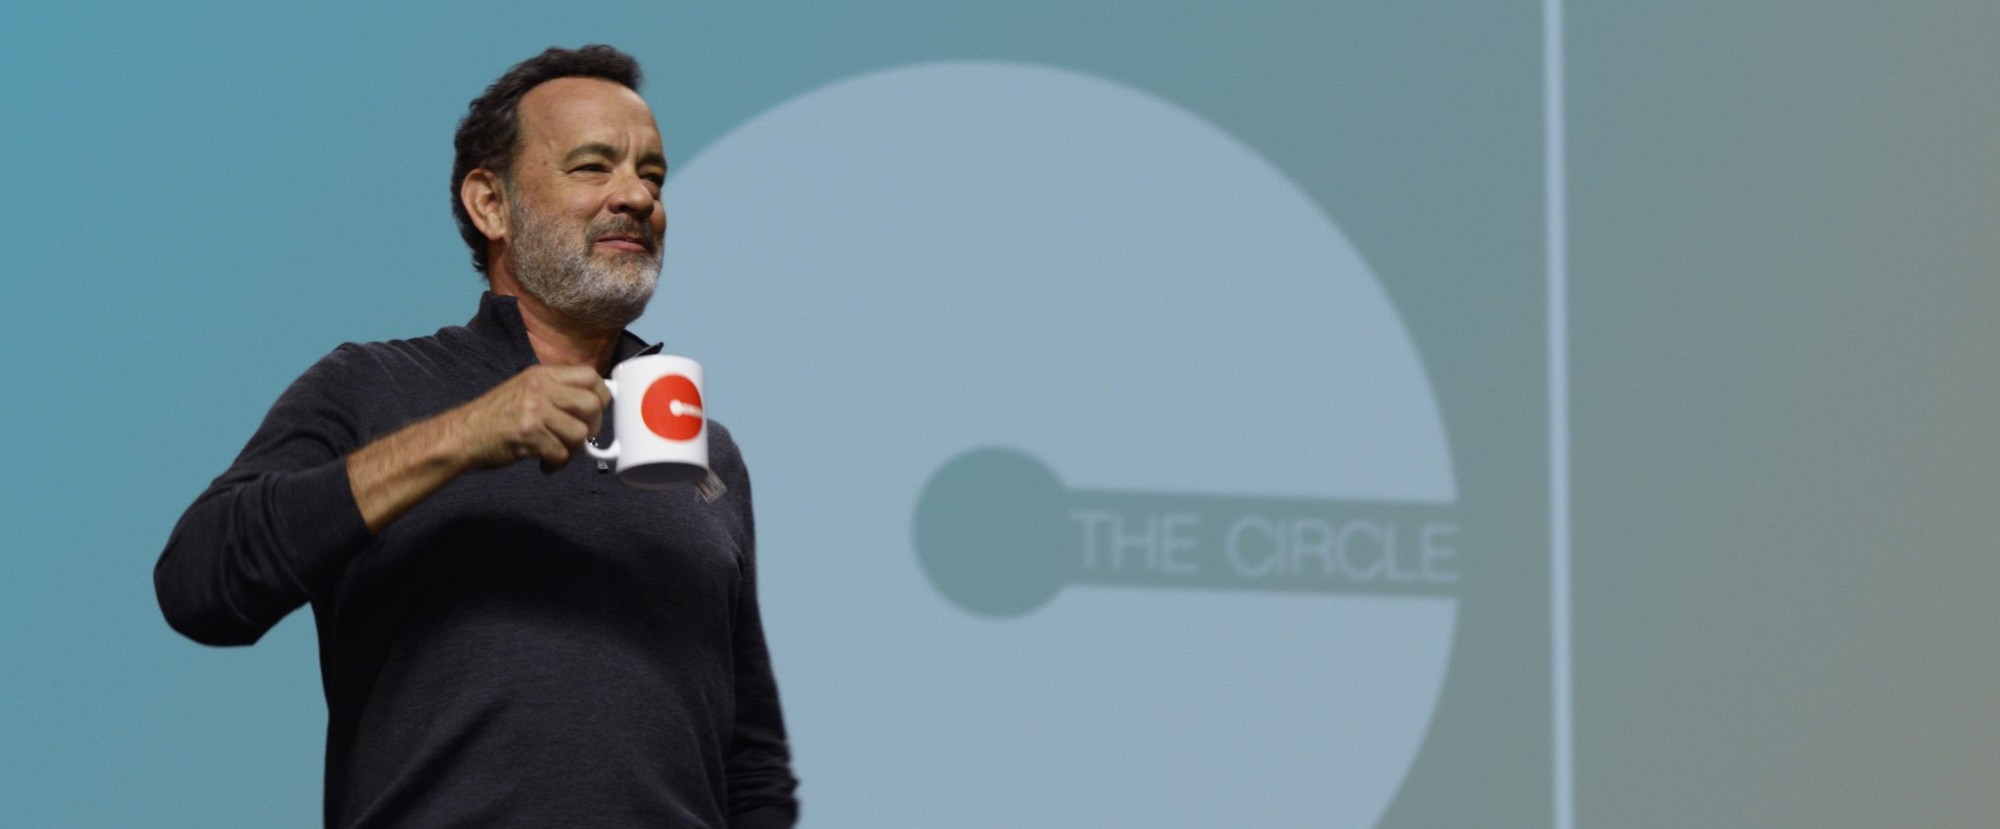 Tom Hanks stars as Eamon Bailey in STX Entertainment's The Circle (2017)